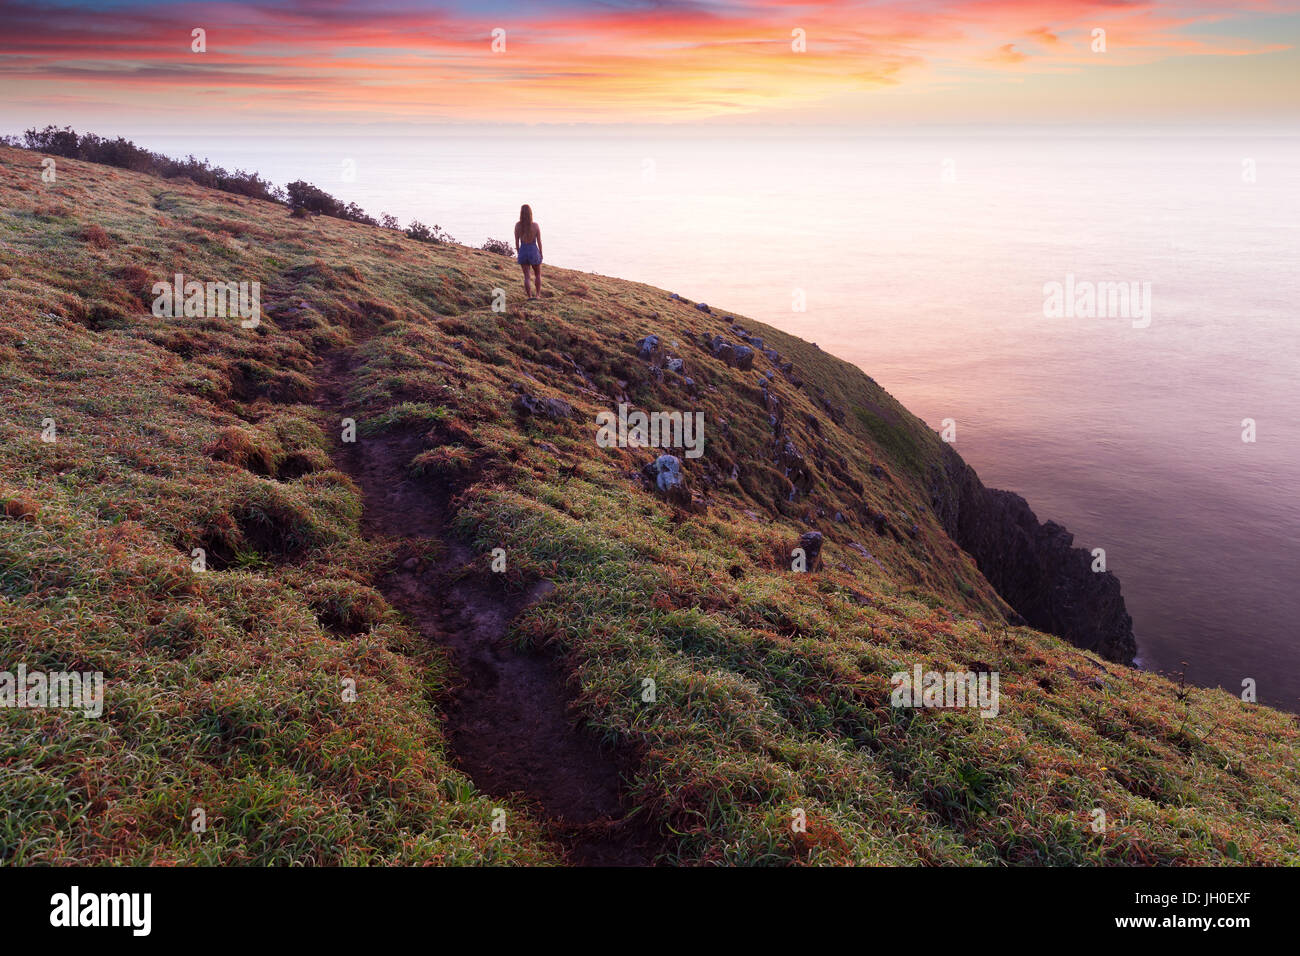 A silhouetted woman walking on a coastal trail, stops to watch a beautiful pink sunrise above the cliff tops near Port Macquarie, Australia. Stock Photo